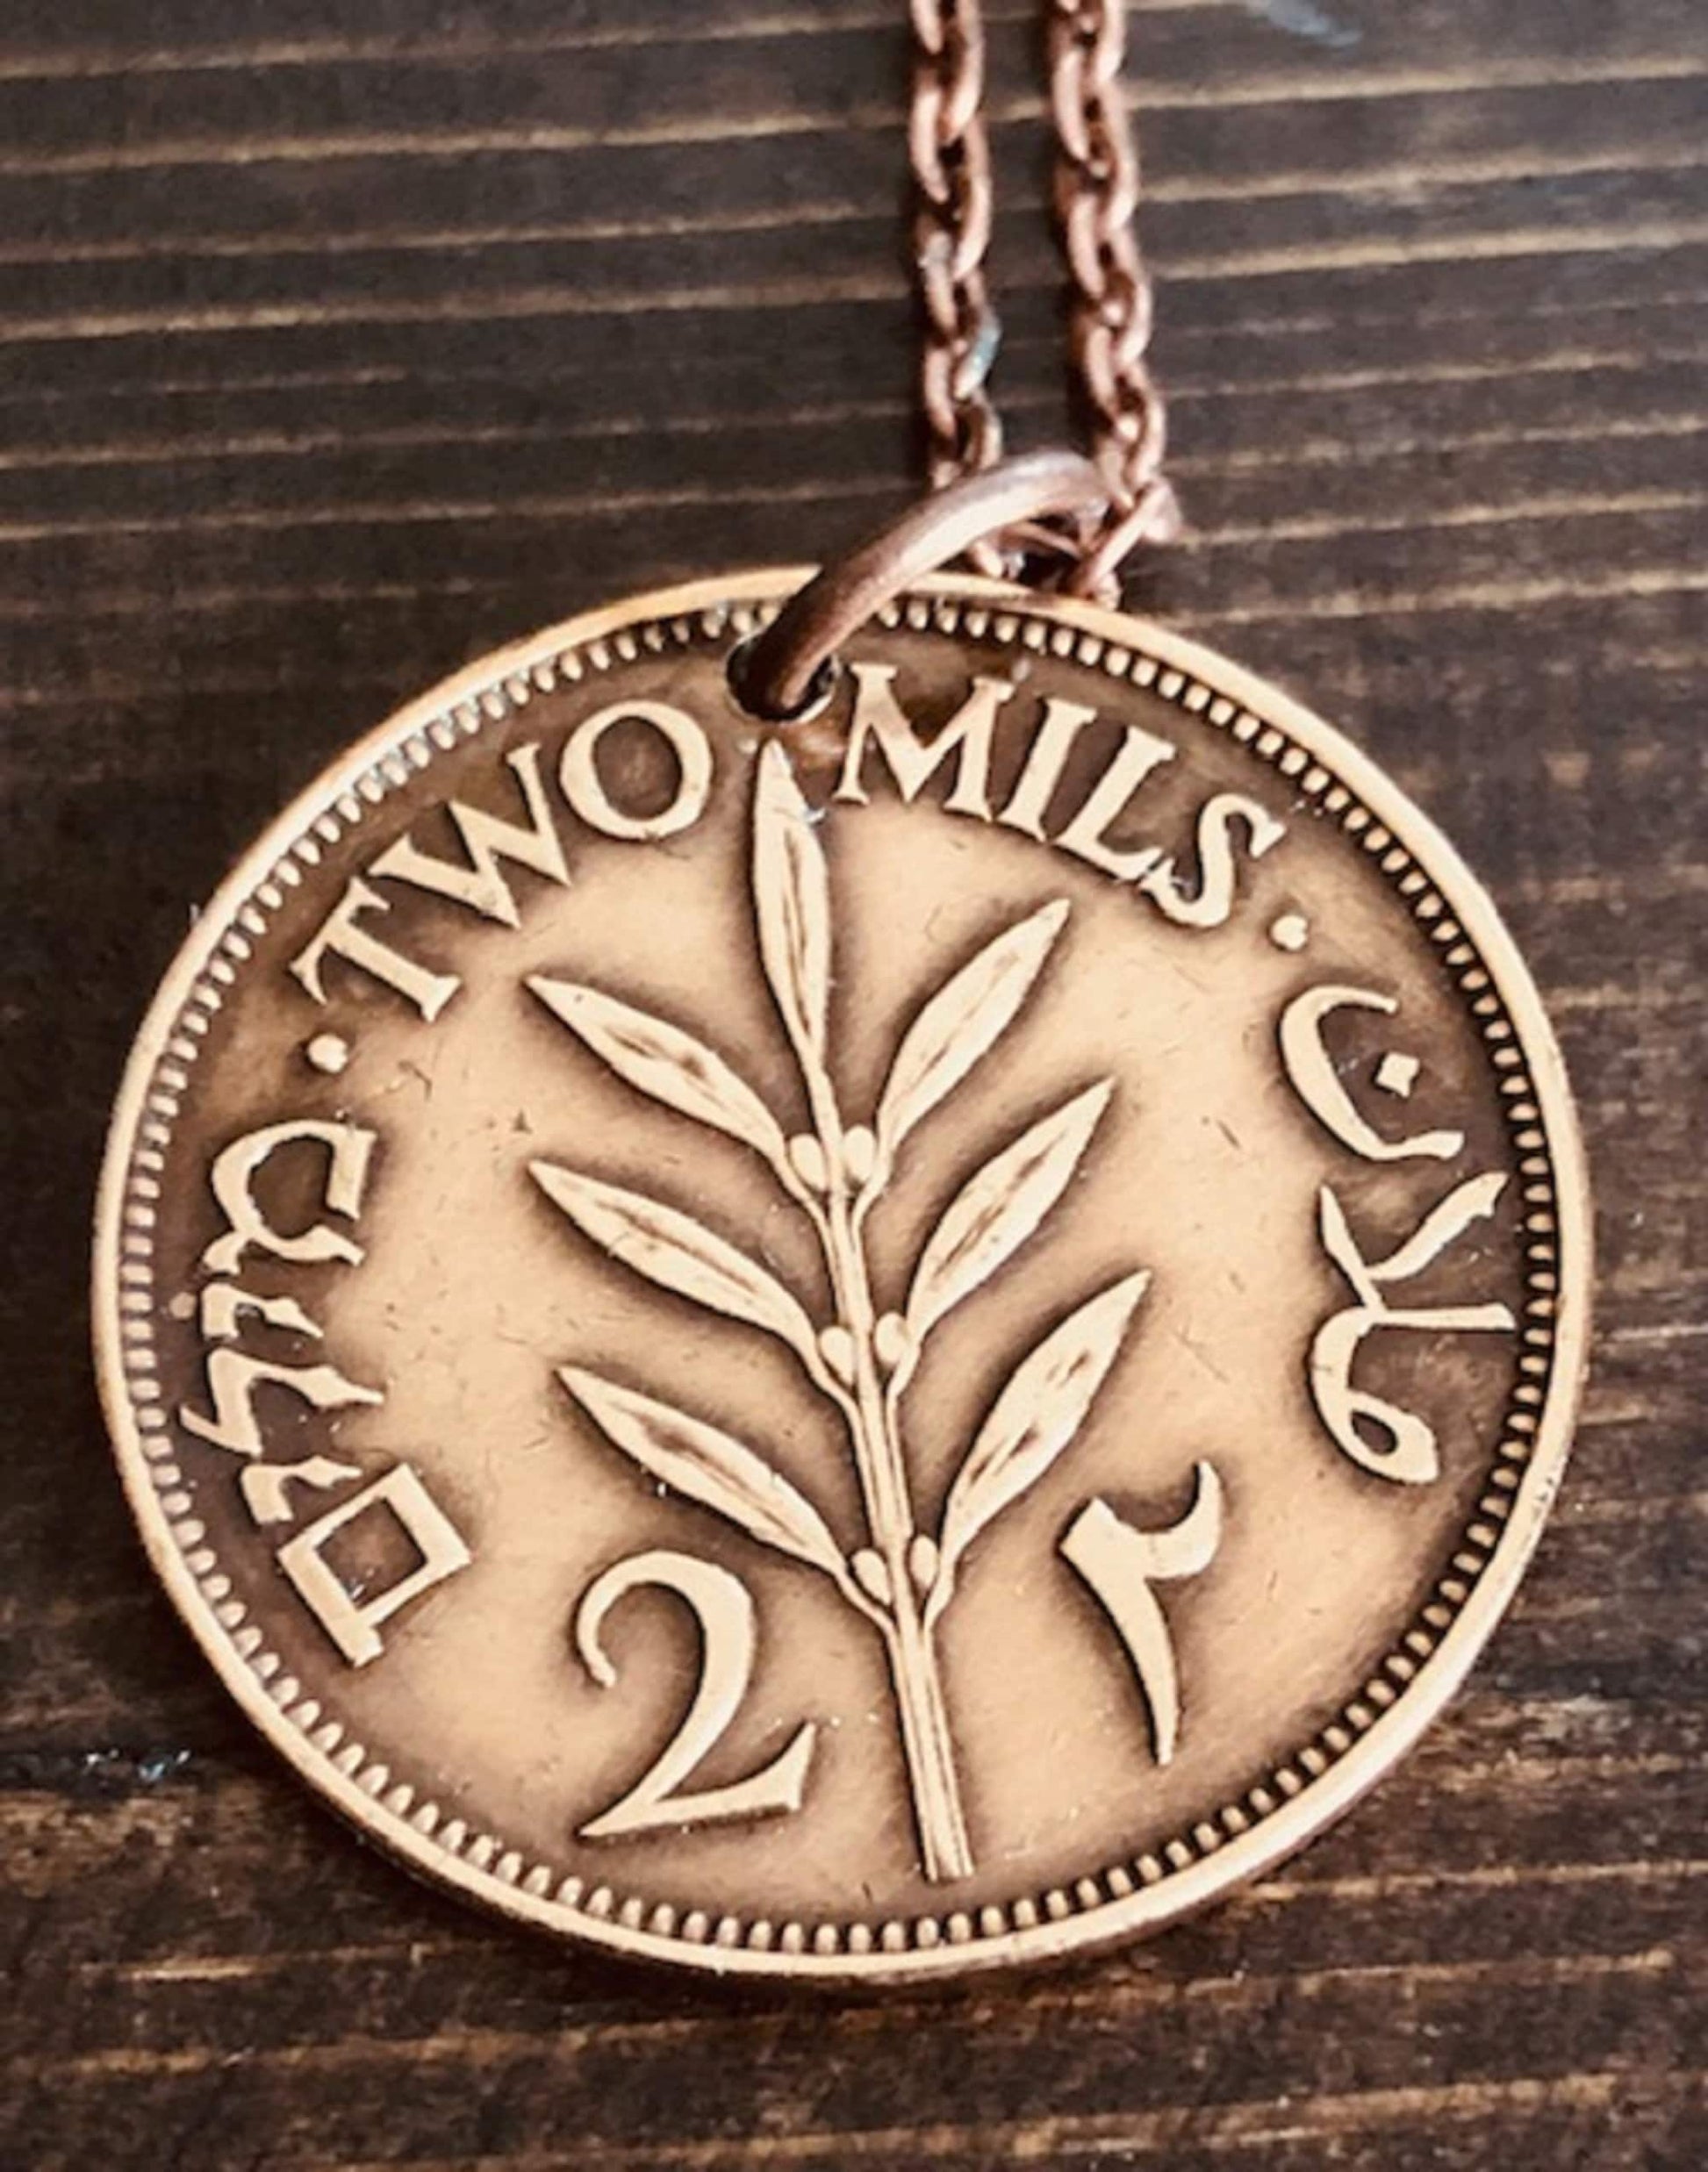 Palestine Coin Necklace Pendant 2 Mils Jewelry Vintage Custom Made Rare coins - Coin Enthusiast - Handmade - Fashion Jewelry